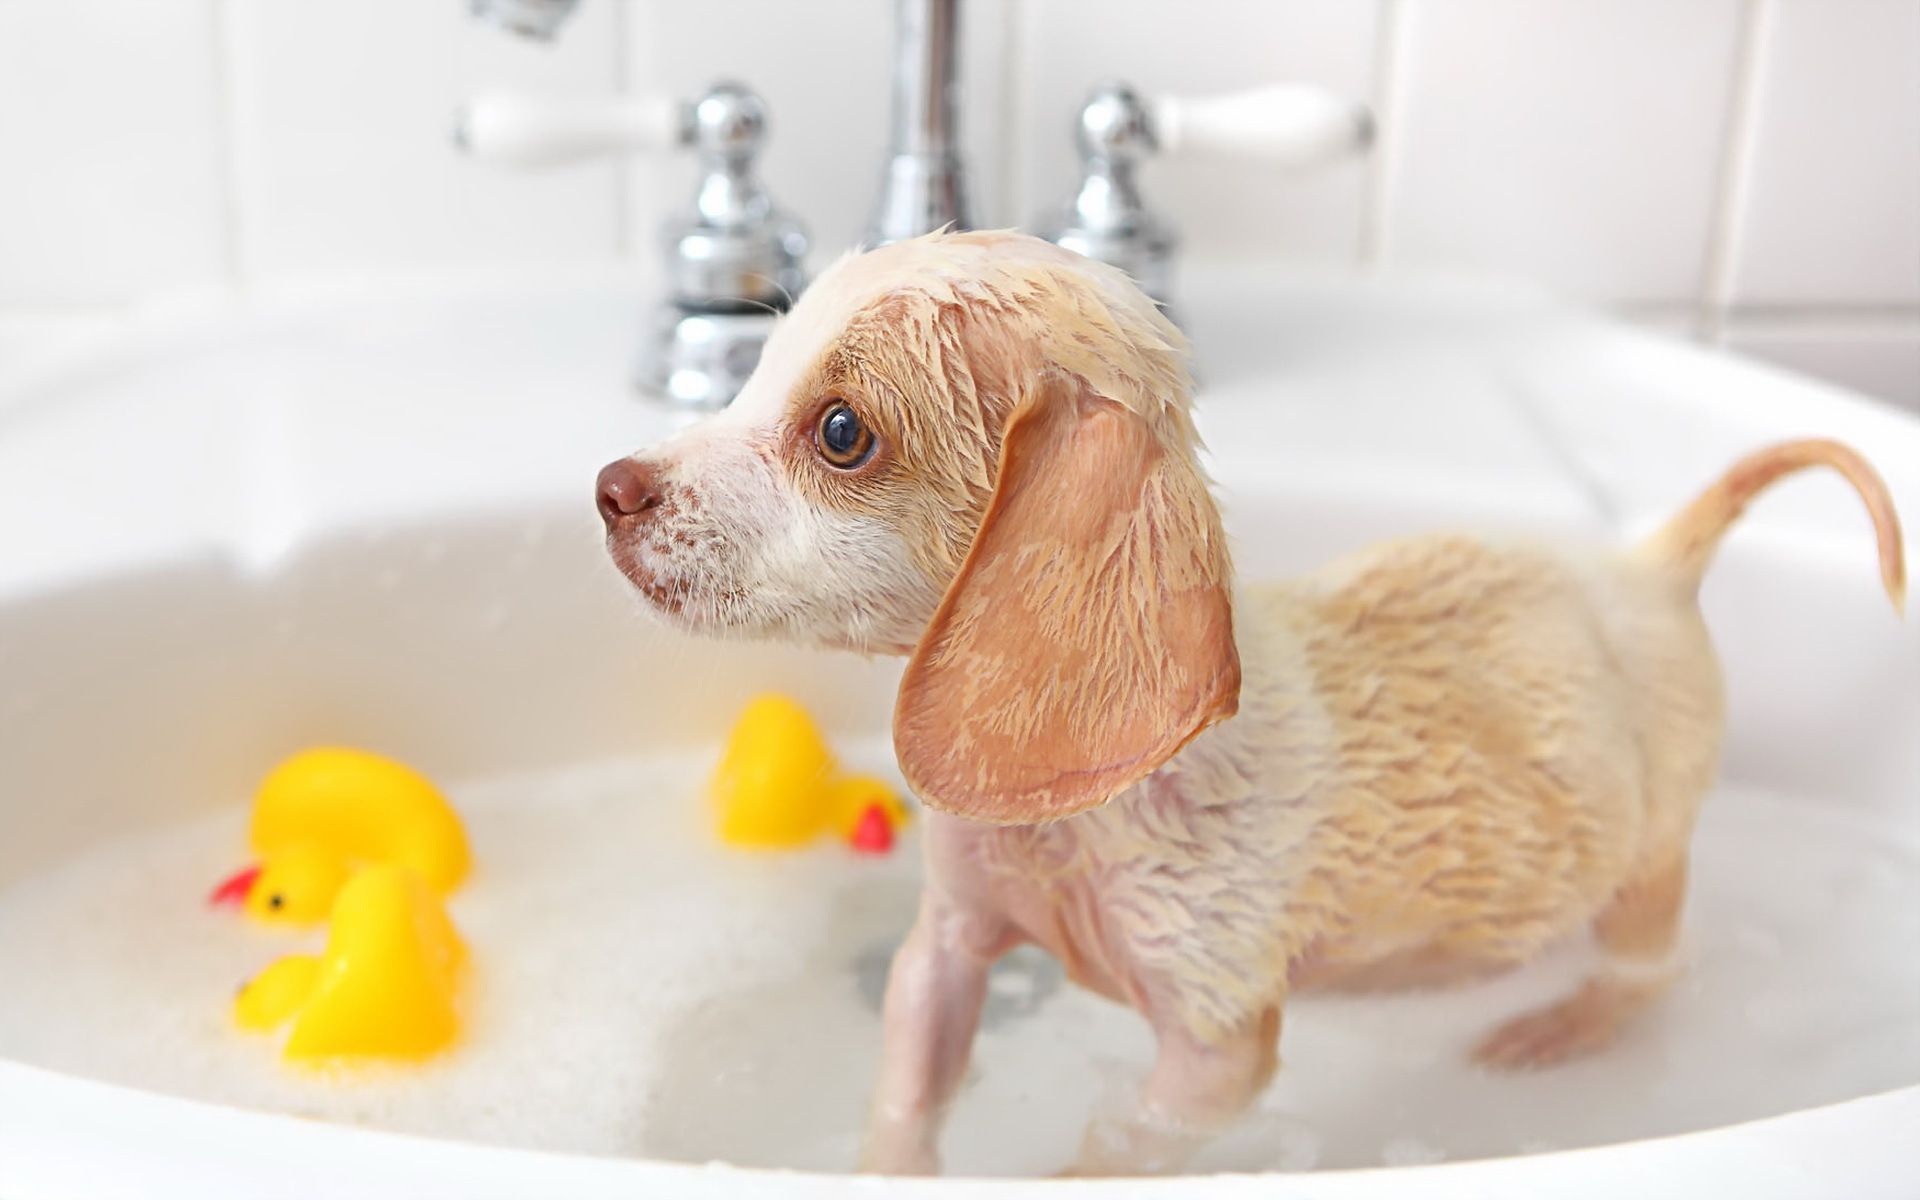 Ranking of the best shampoos for dogs in 2022